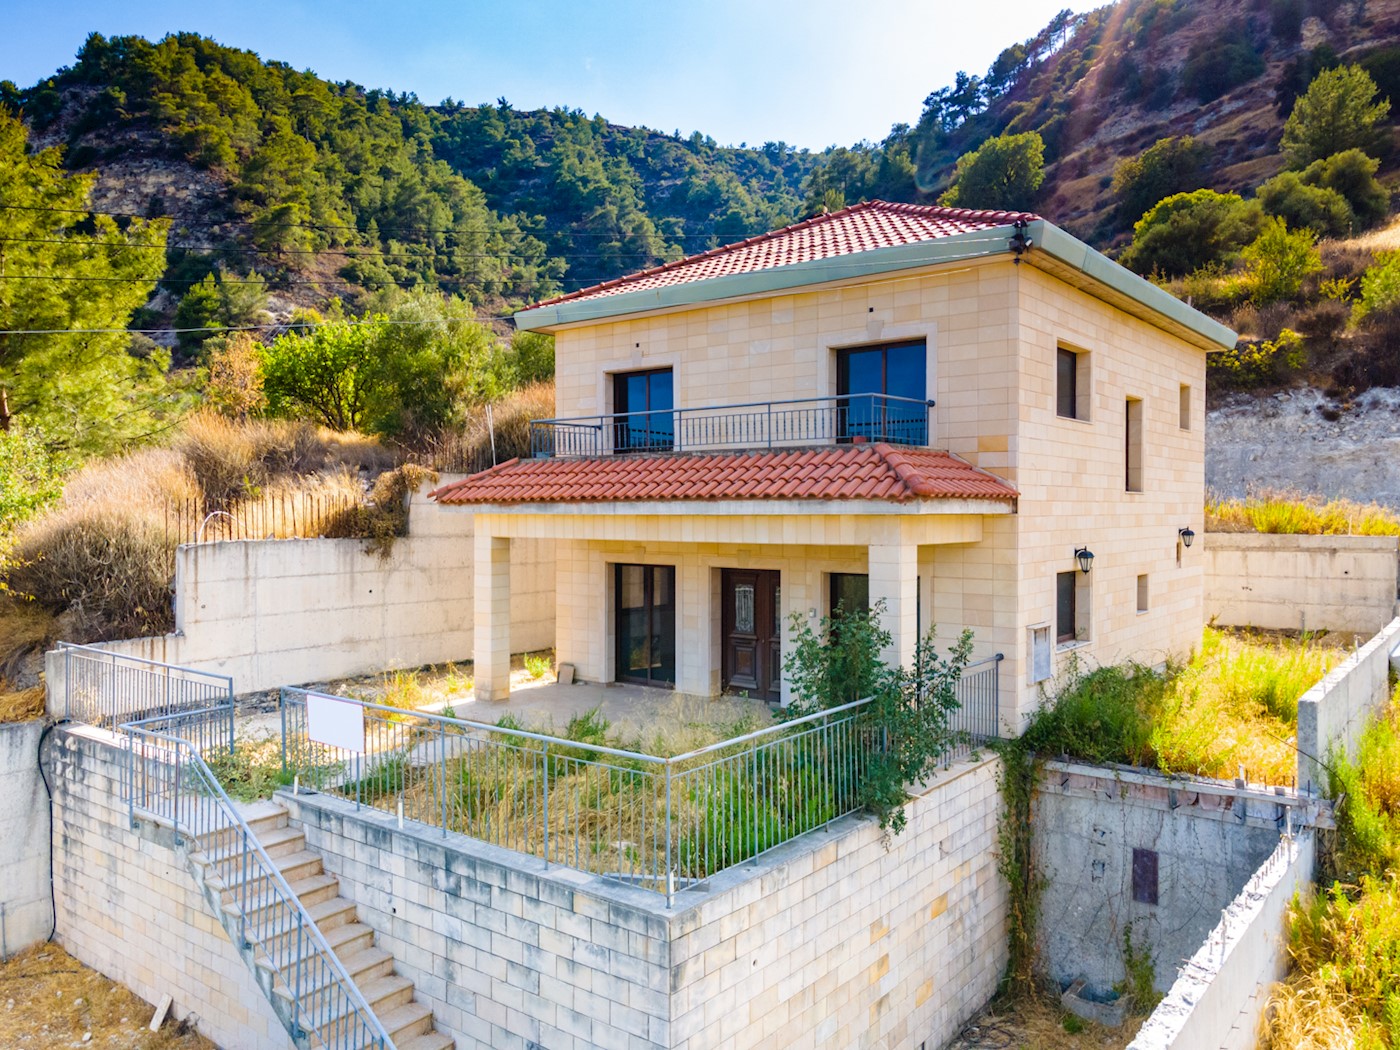 Detached two-storey house in Ayios Georgios, Limassol 1/26